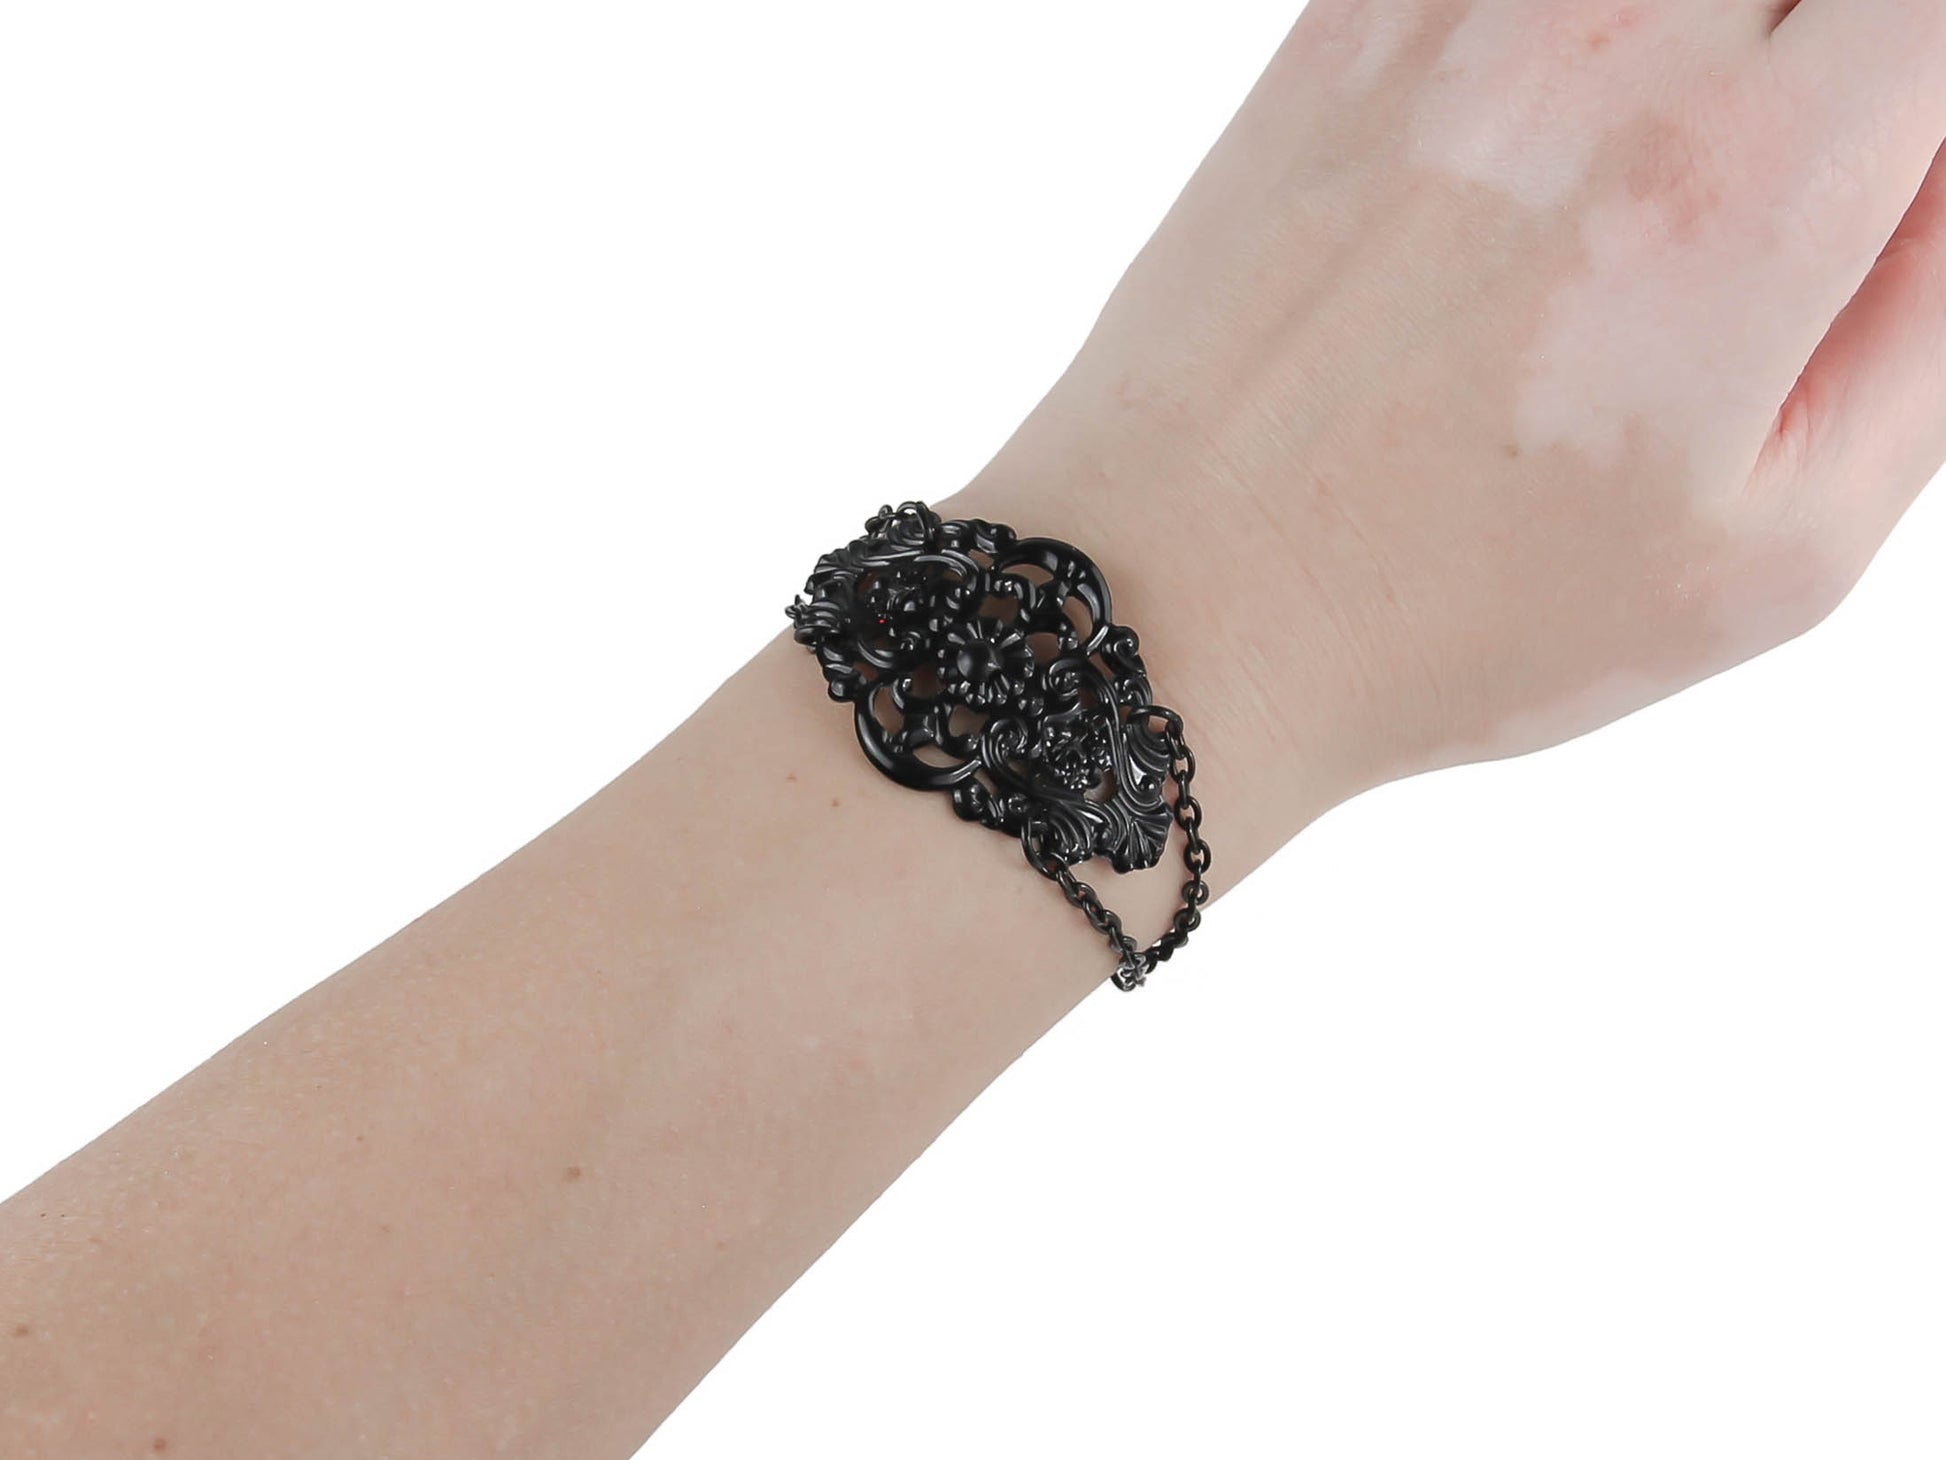 This Myril Jewels delicate black filigree bracelet is the epitome of dark avant-garde elegance. Handcrafted with precision, it's ideal for those drawn to the gothic and alternative style, merging Neo Gothic intricacy with a modern twist. Perfect for whimsigoth, witchcore enthusiasts, or as a statement piece for minimal goth daily wear, it's also a sophisticated choice for Halloween jewelry or Gothic-chic fashion statements